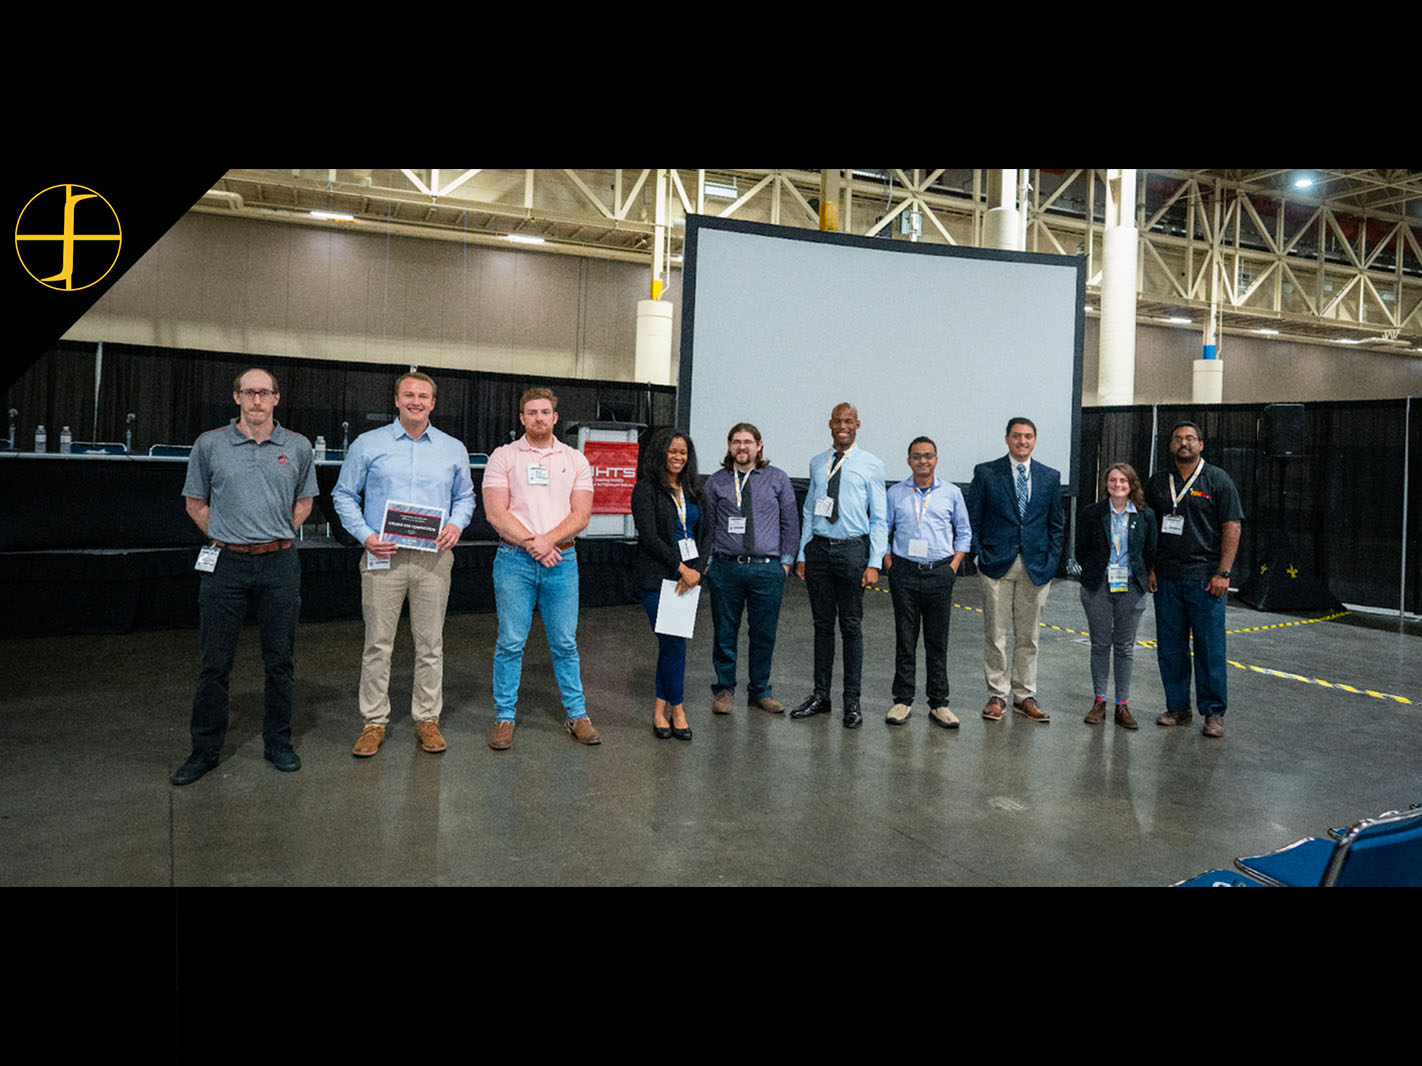 Fluxtrol and ASM International Announce the 2022 Winners of the Academic Researchers Award and Fluxtrol Student Research Awards